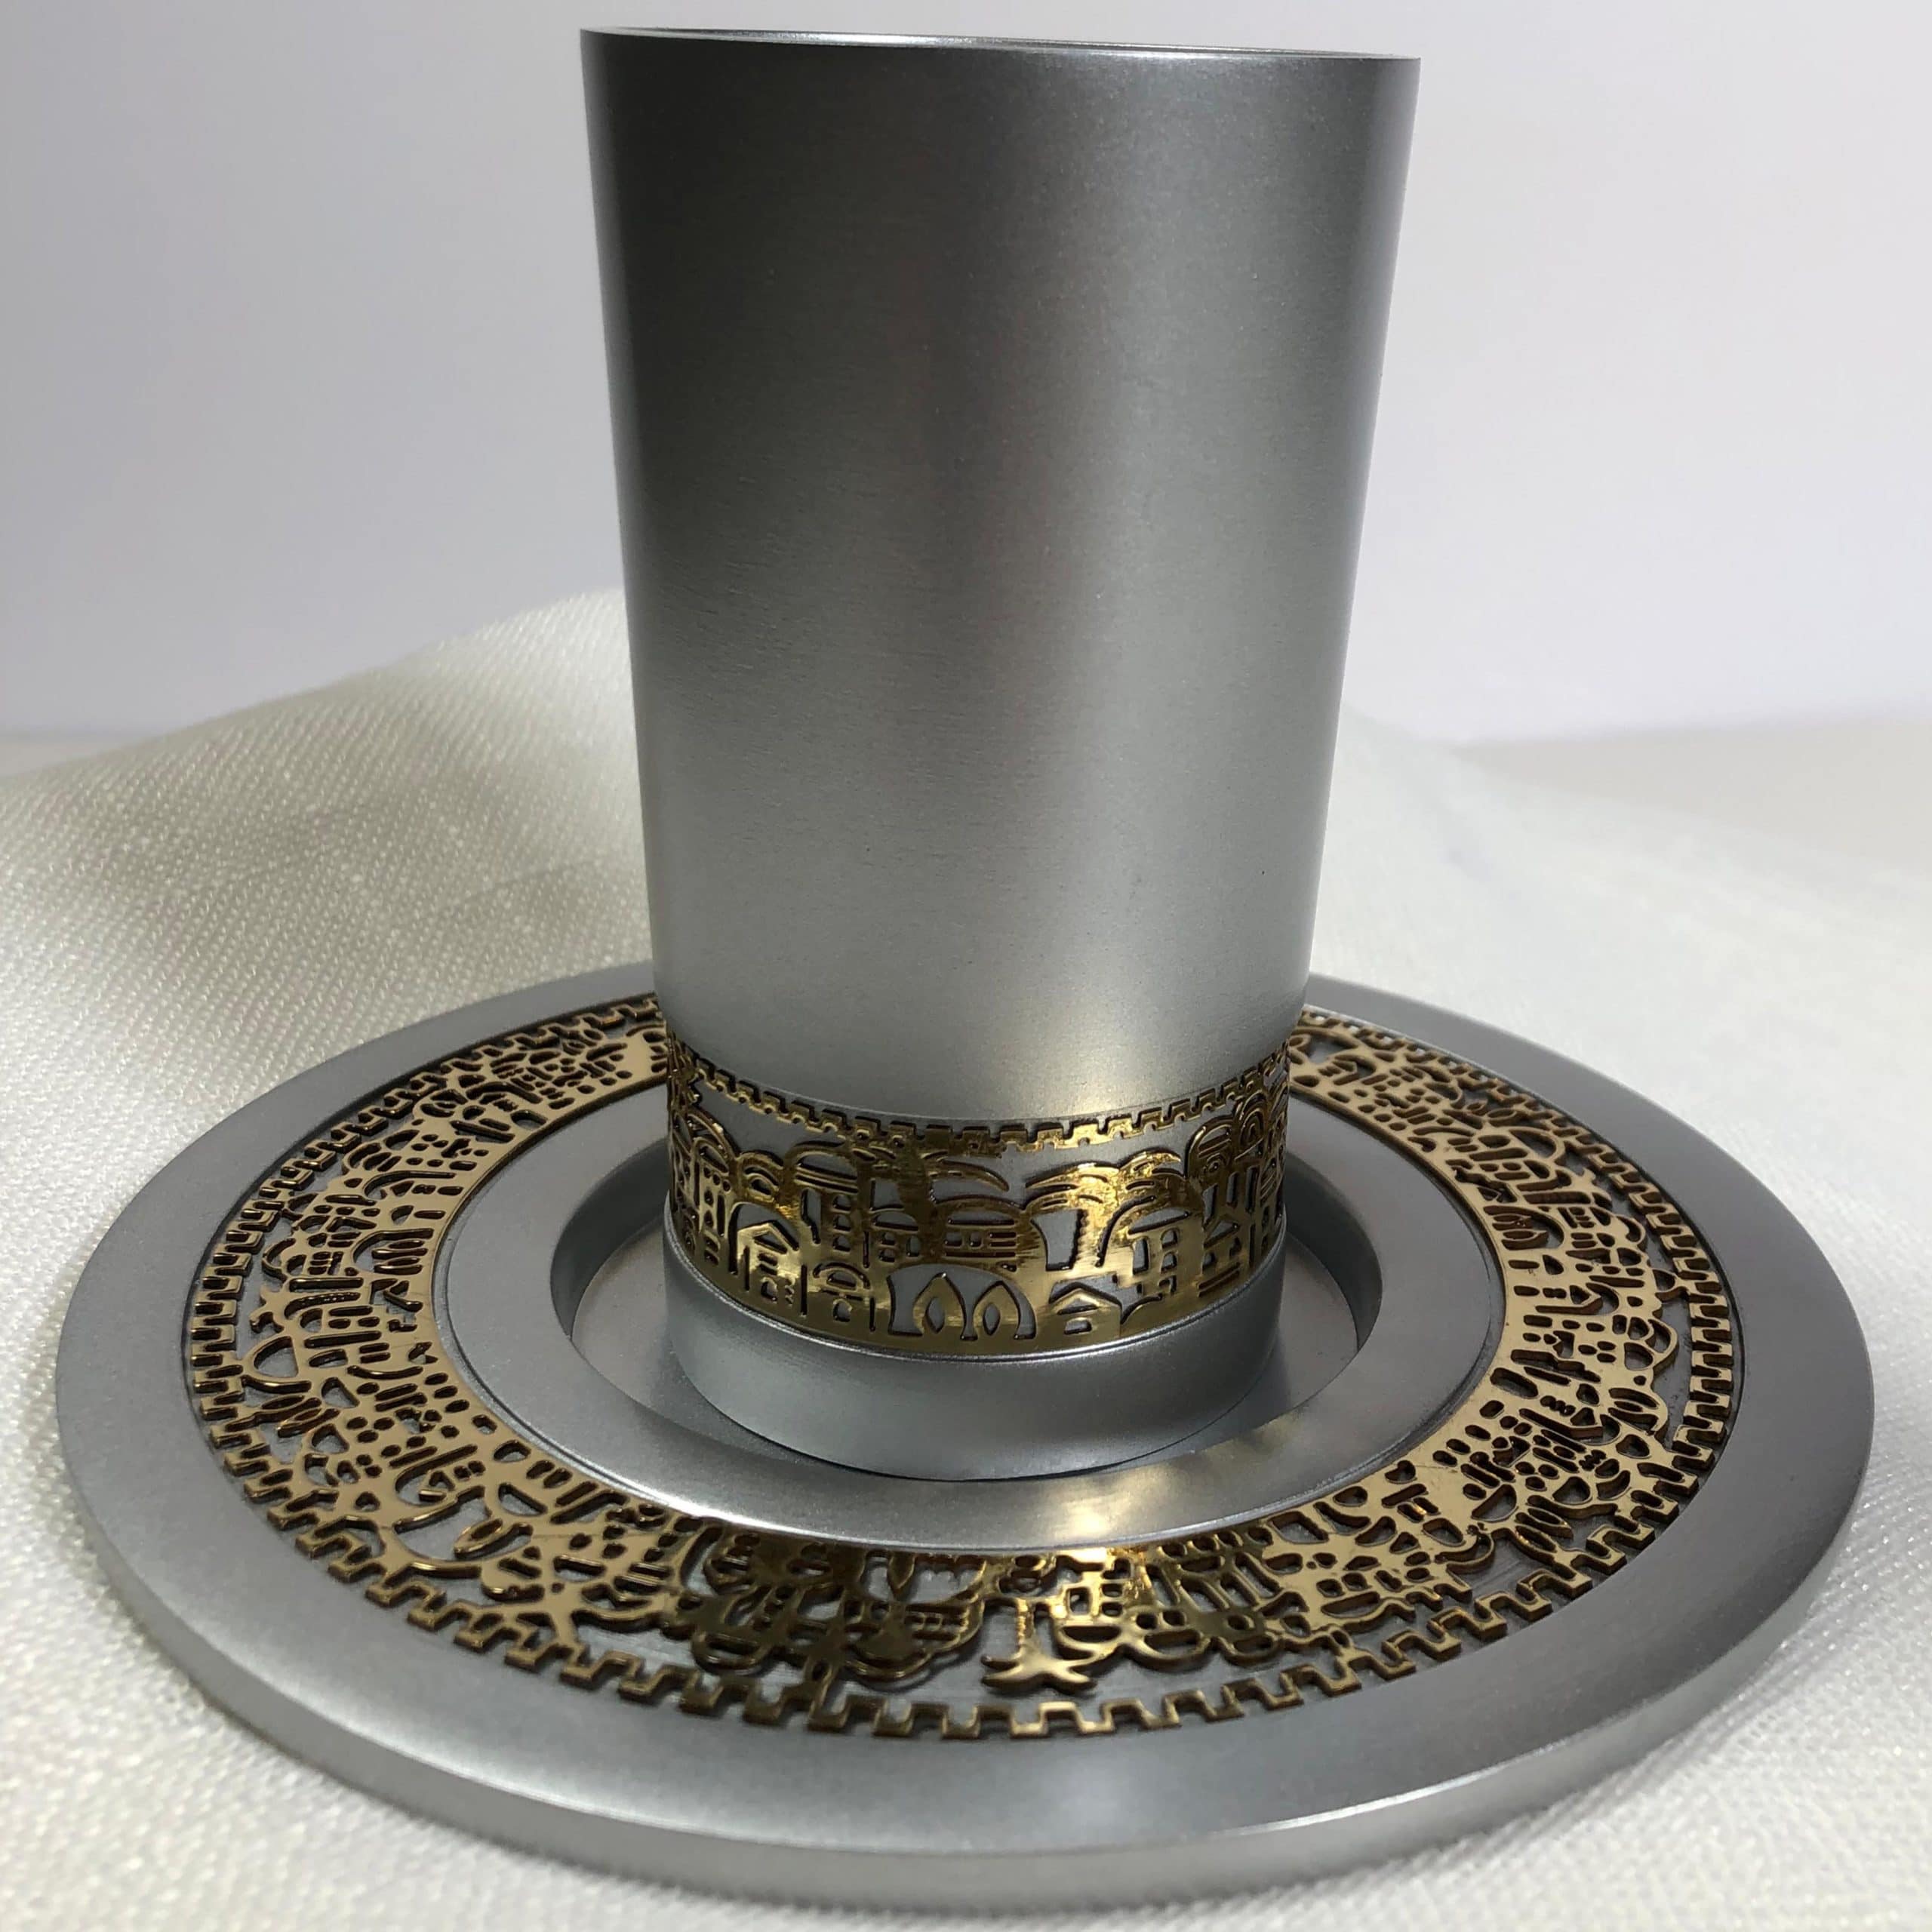 Silver Cup with Gold Lace Wine Goblet Anodized Aluminum Decorated with Lace Designed by Artist Yair Emanuel 